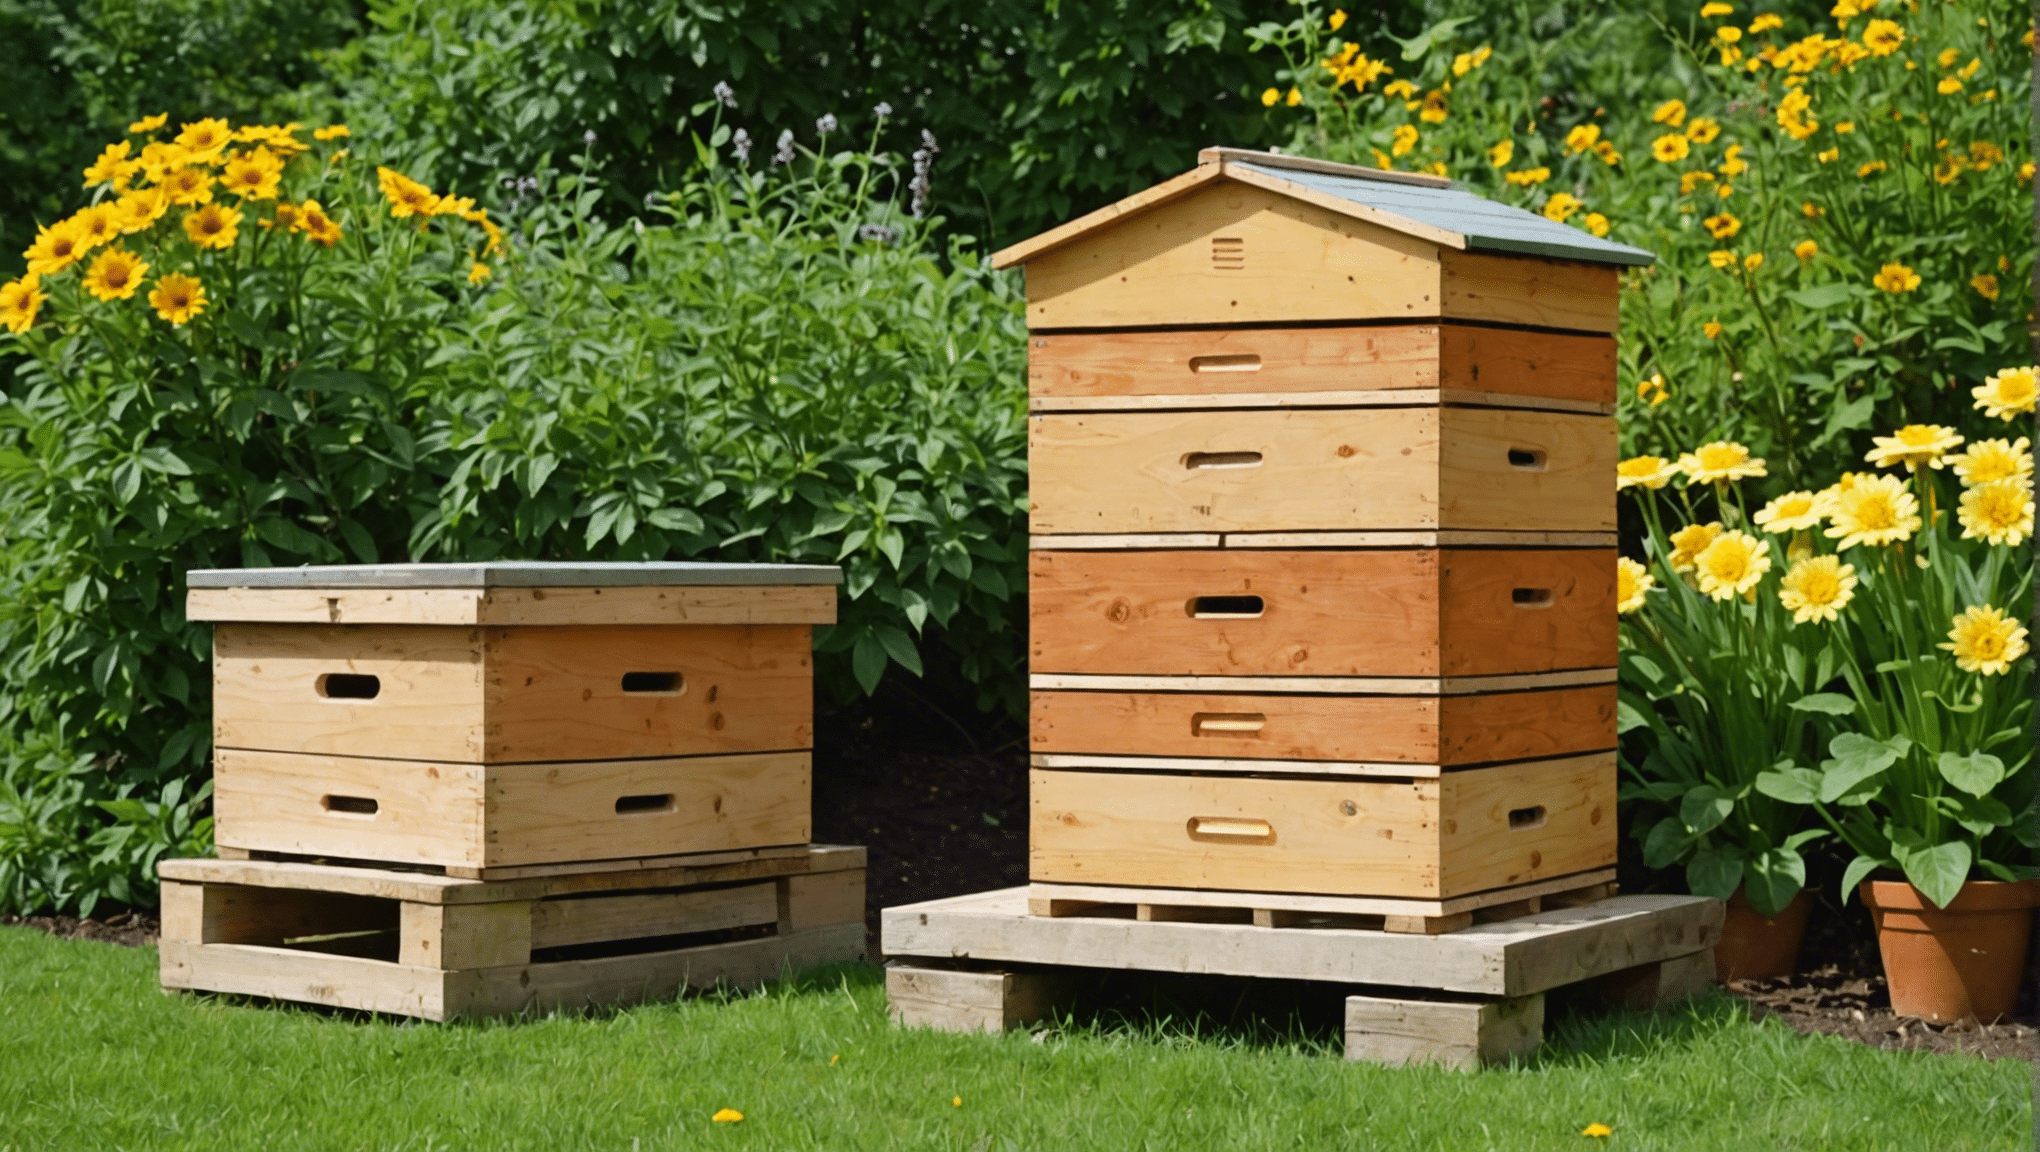 discover the advantages of using bee hive boxes and how they can improve your beekeeping experience. find out more about the benefits of bee hive boxes and their impact on bee colonies.